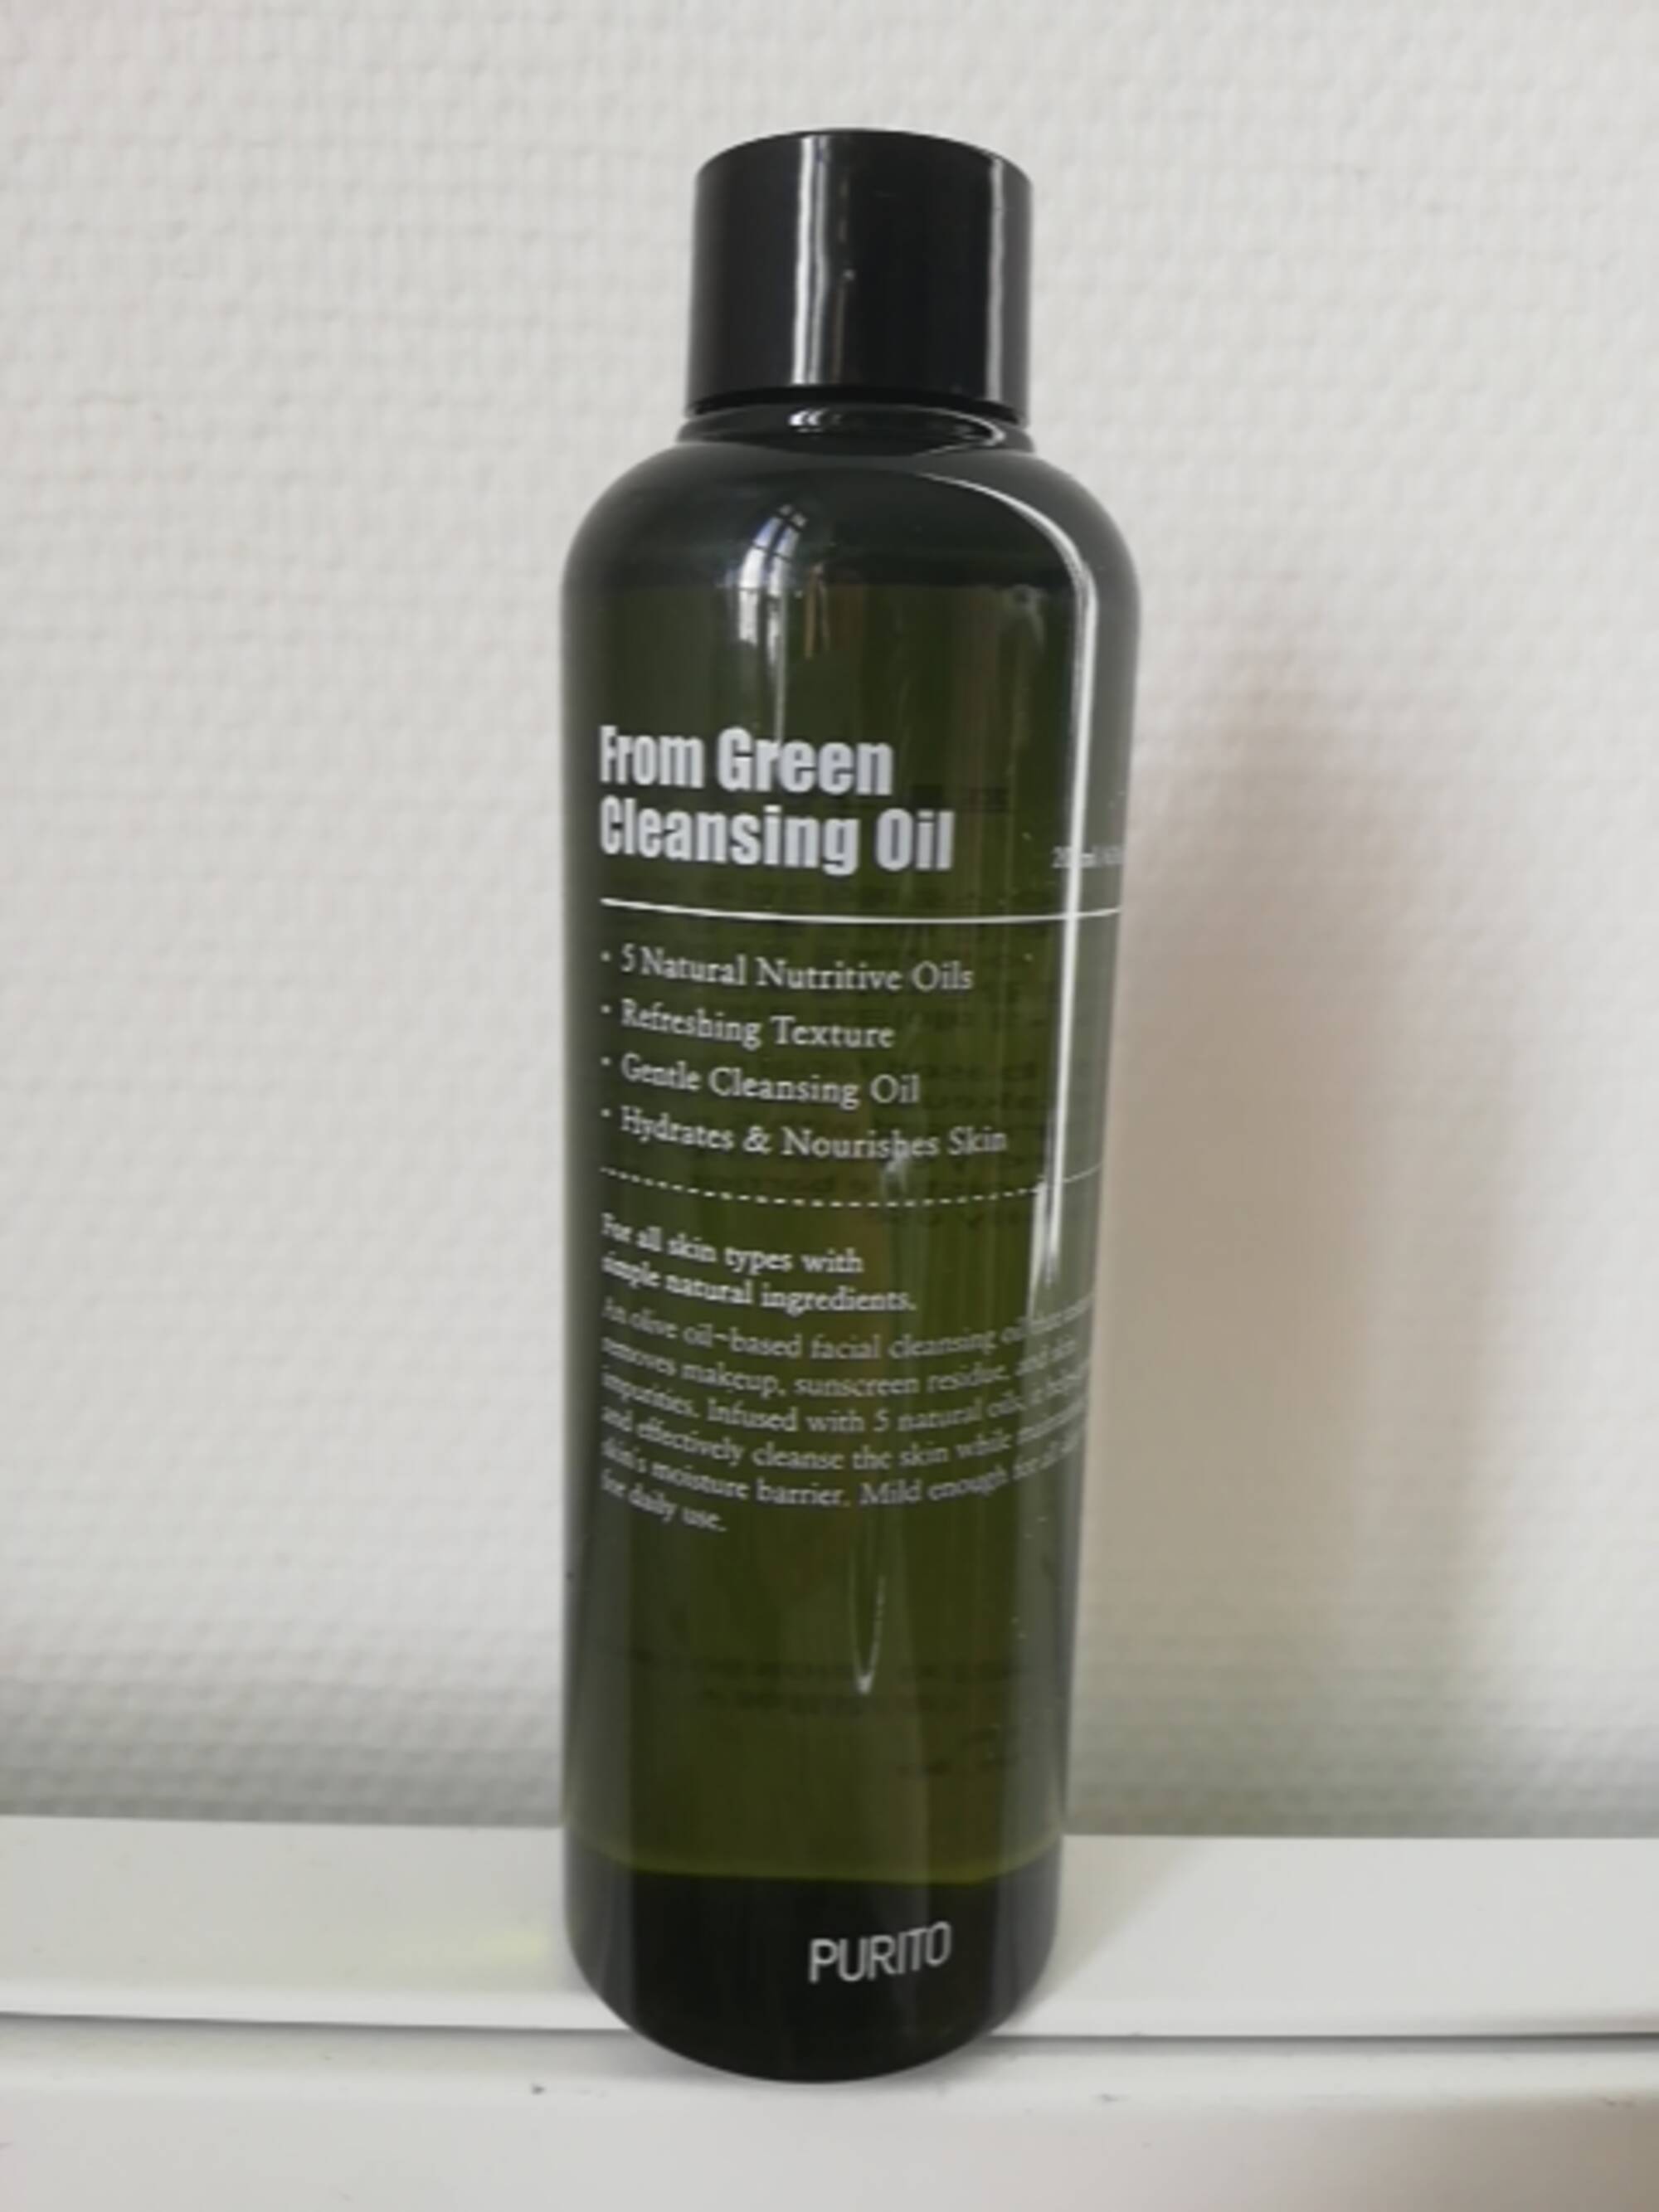 PURITO - From green - Cleansing oil